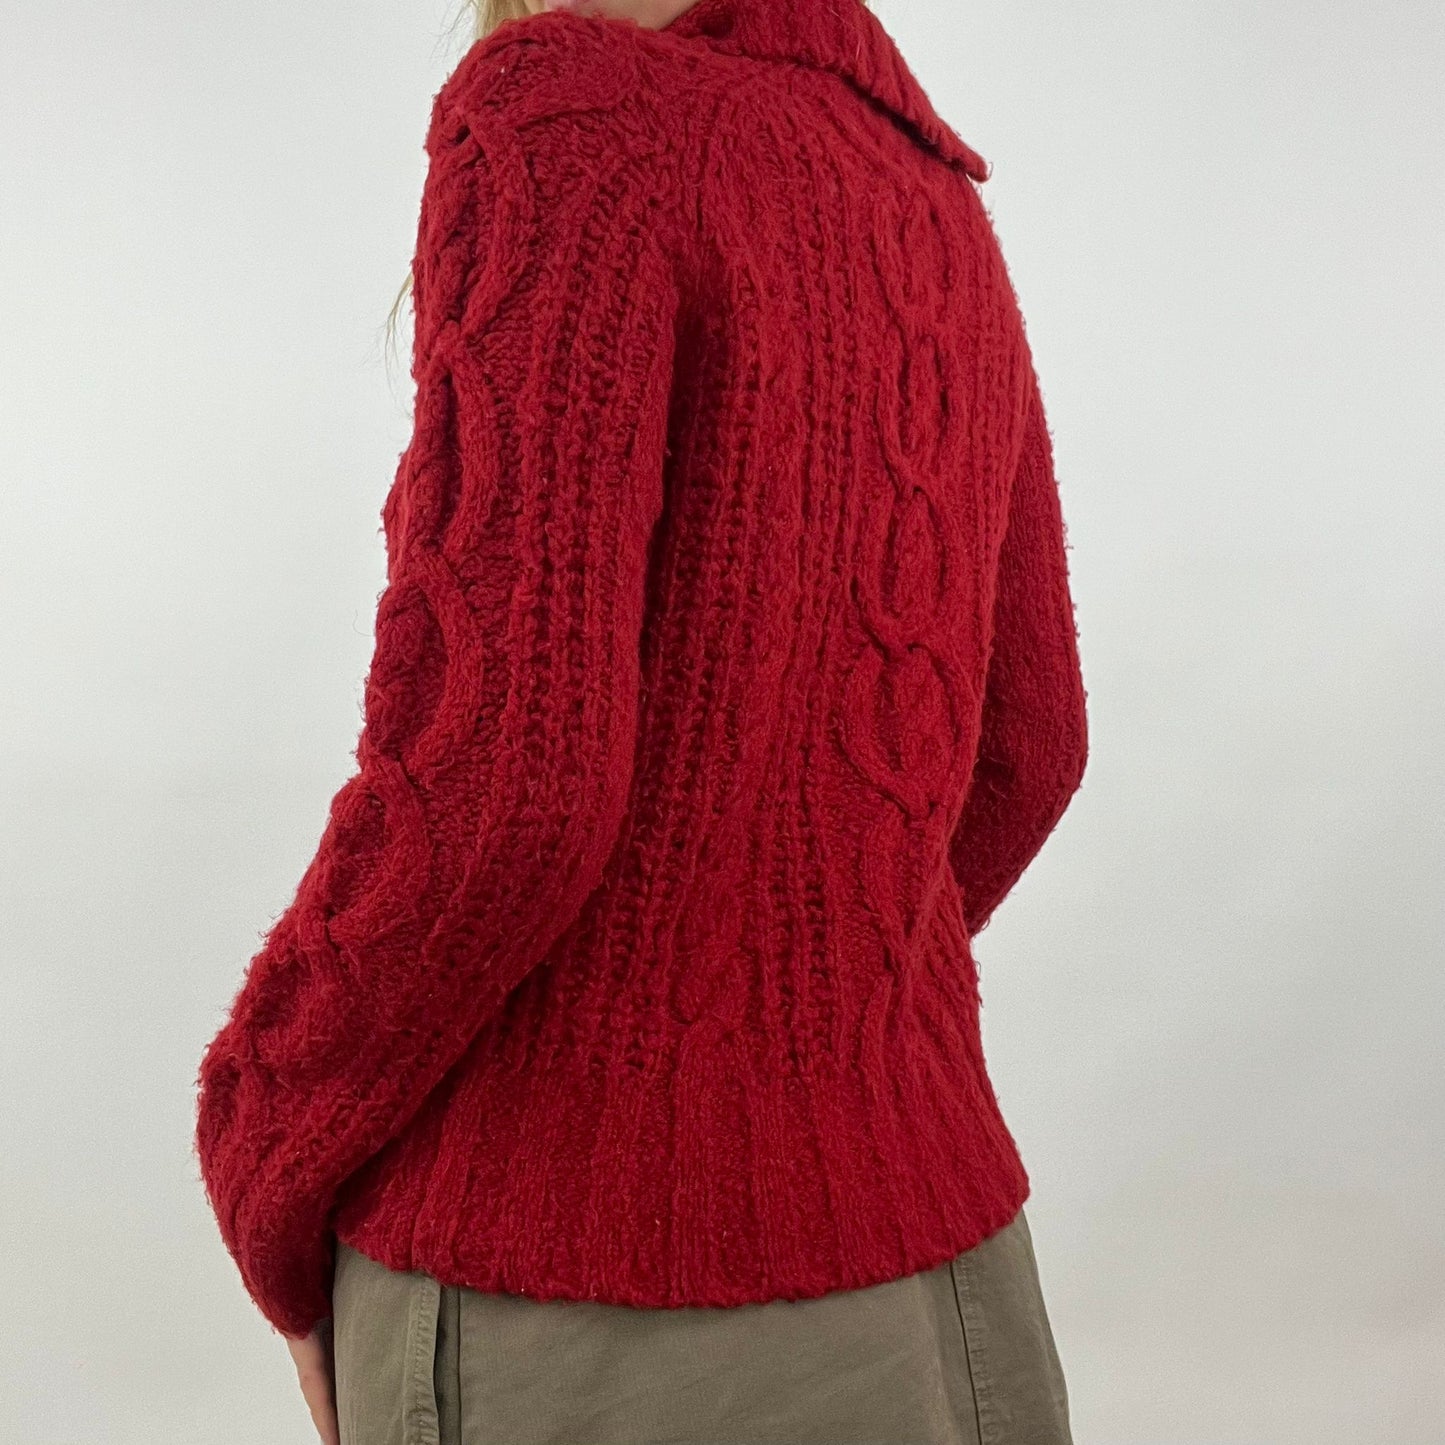 12 DAYS OF XMAS DROP | small red old label topshop knit roll neck jumper